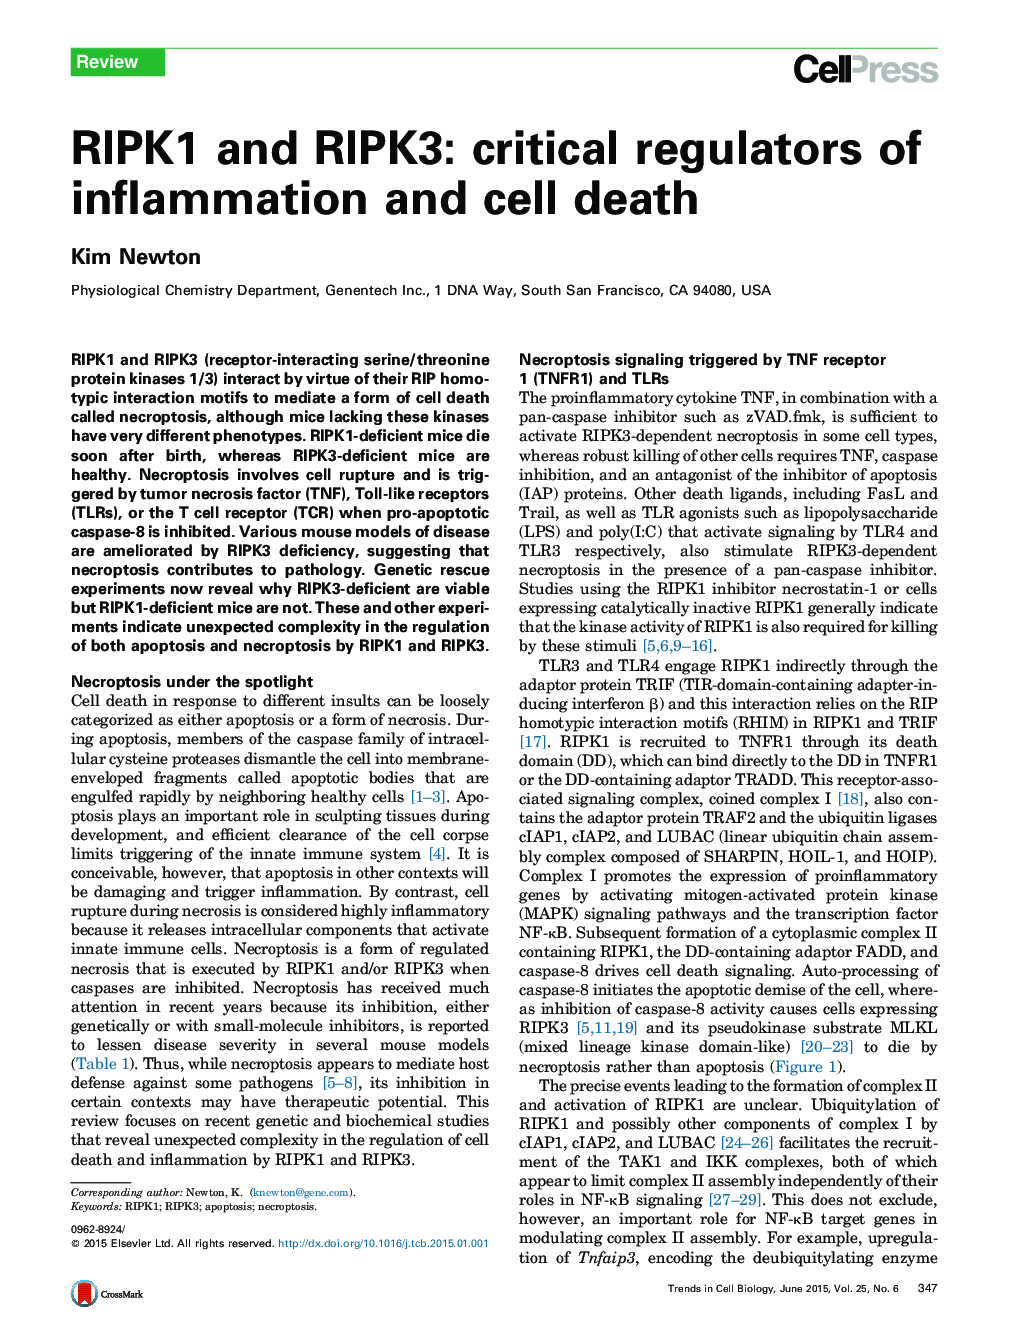 RIPK1 and RIPK3: critical regulators of inflammation and cell death